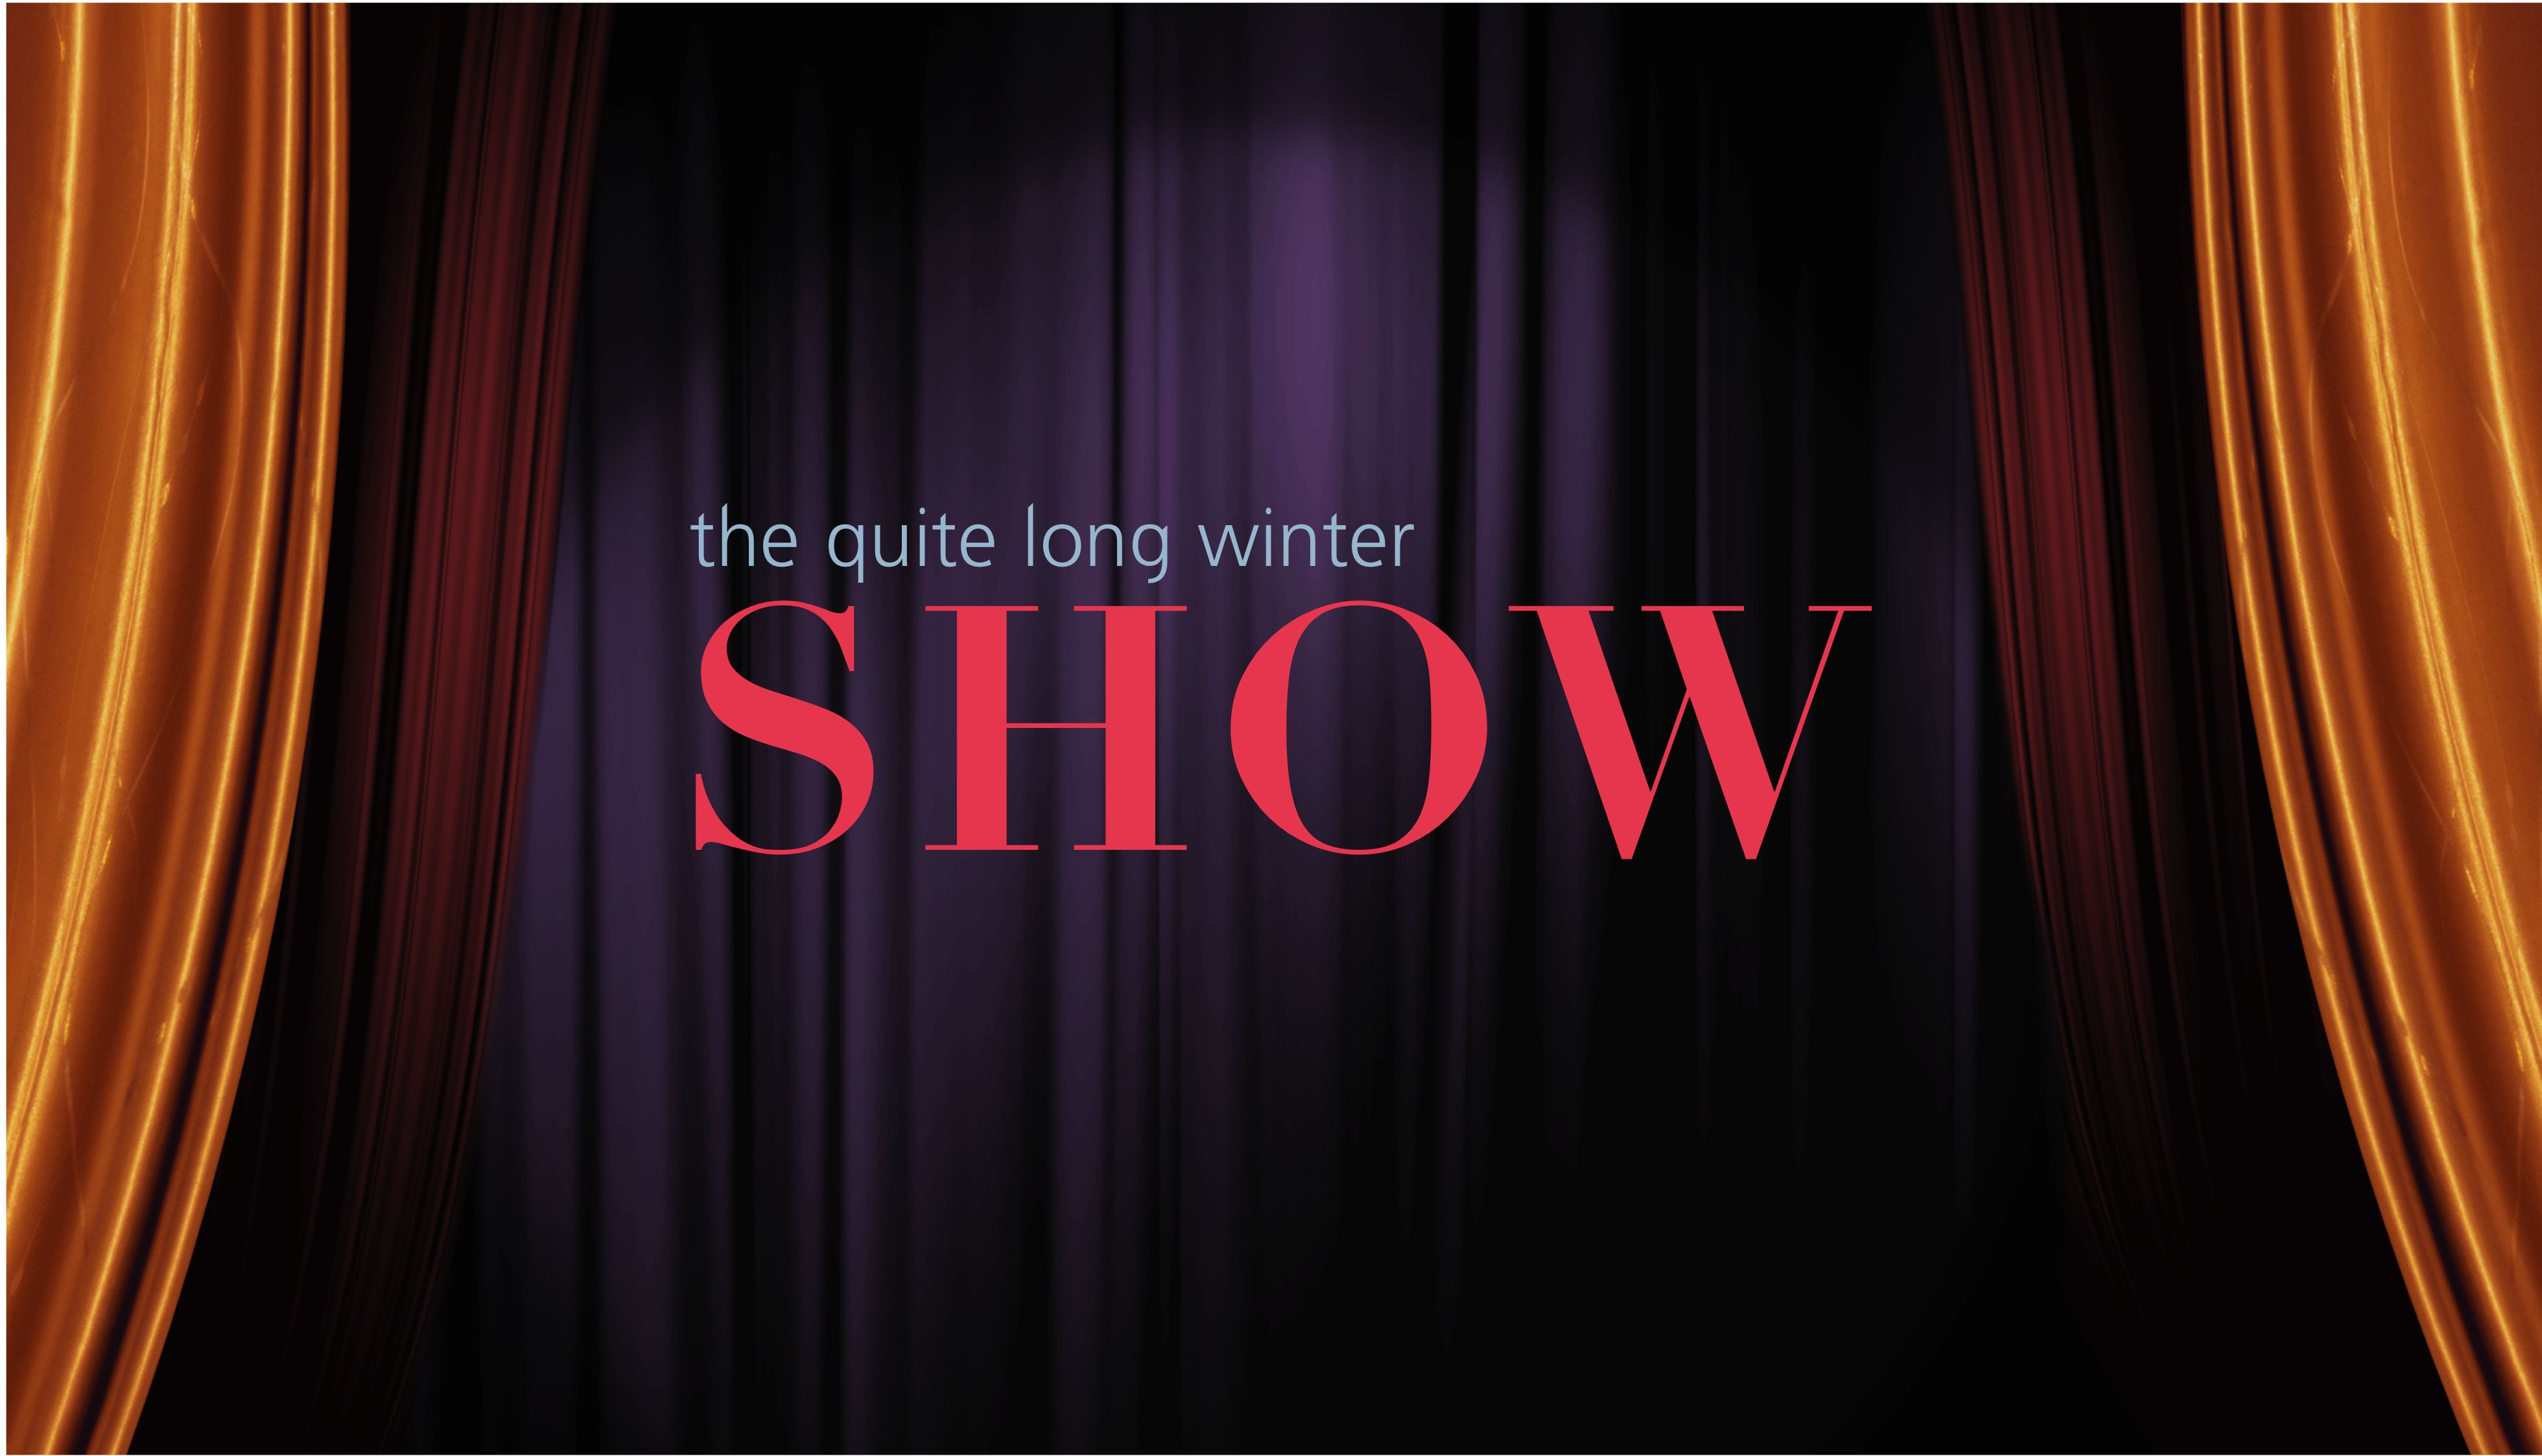 the quite long winter SHOW